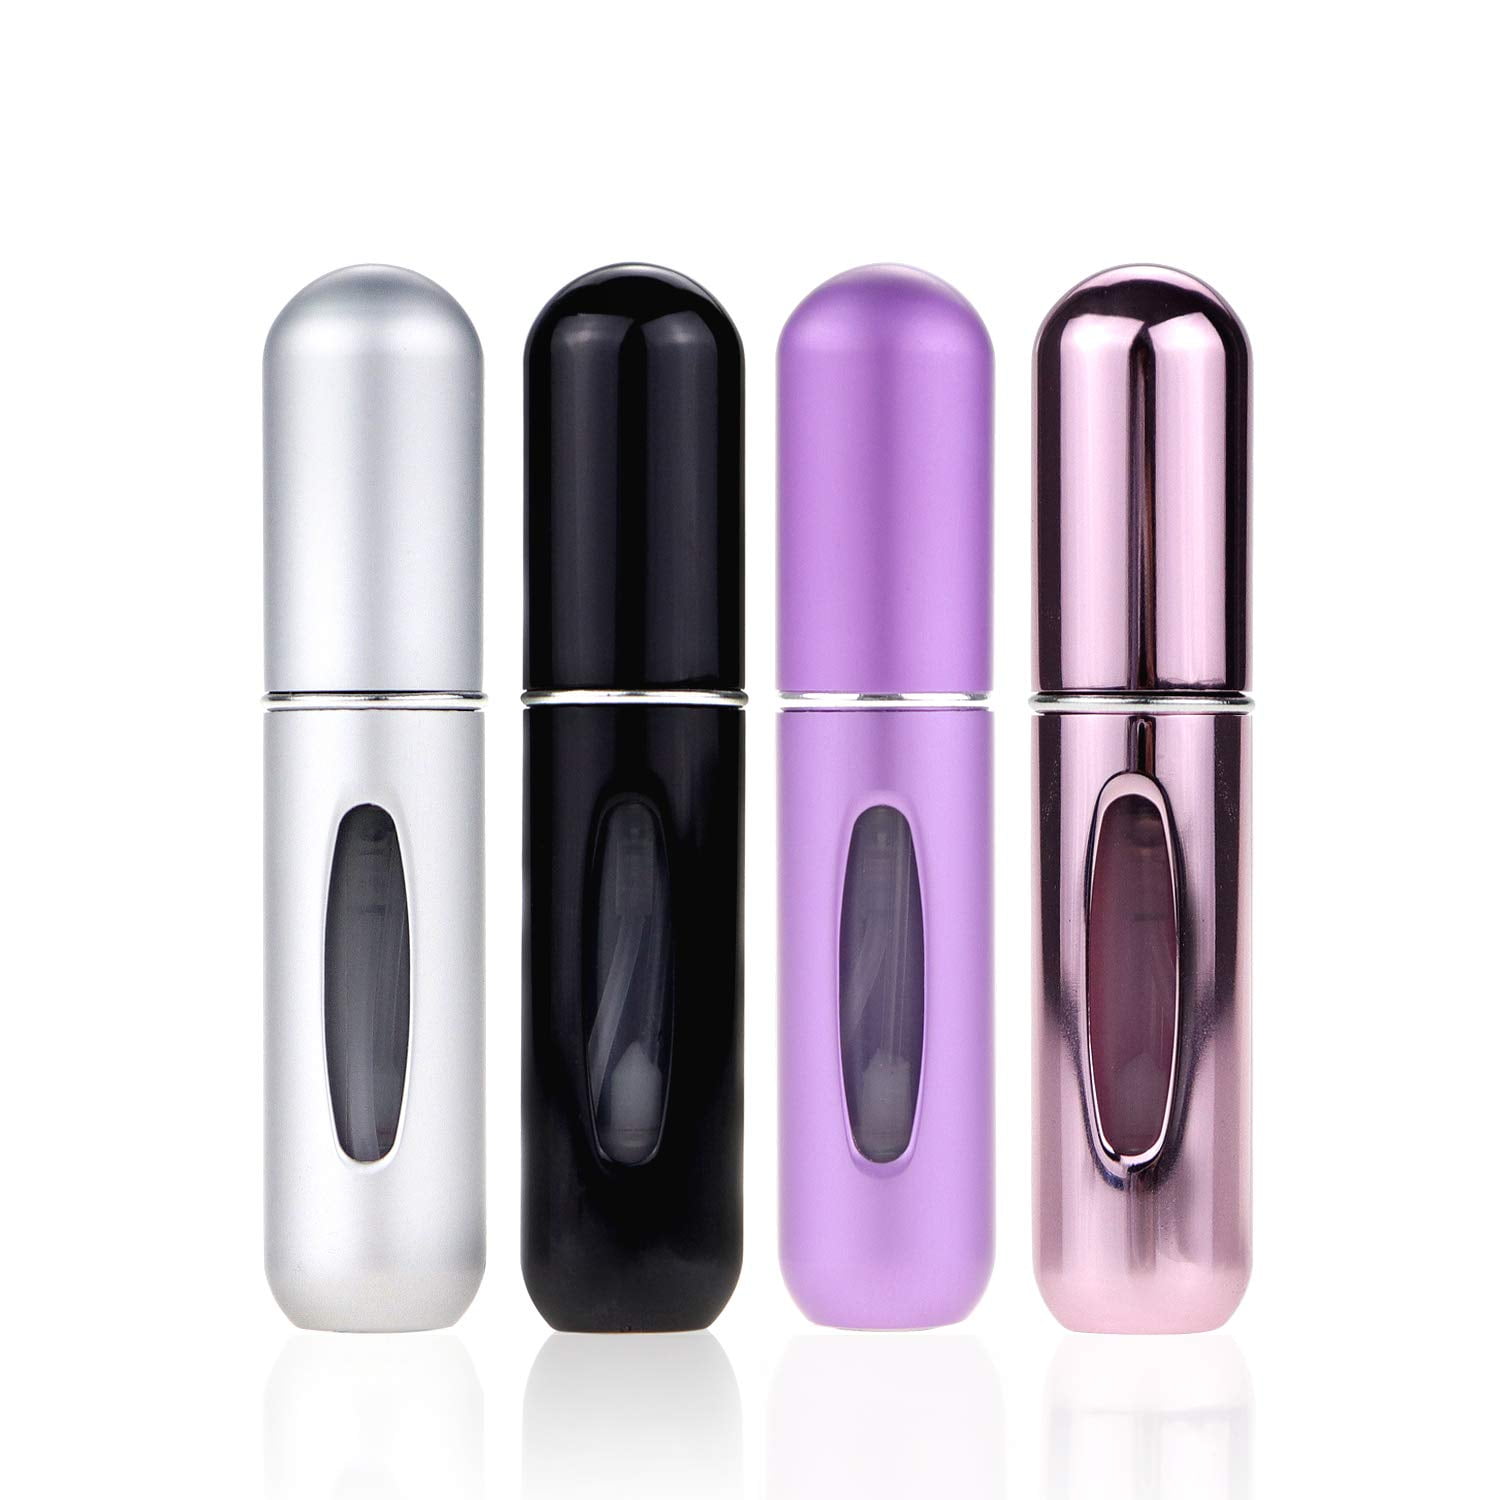 BeautyChen 4 Pack 5ml Portable Mini Refillable Perfume Atomizer Bottle  Perfume Spray Empty Easy to Fill Scent Aftershave Pump Case Travel Outgoing